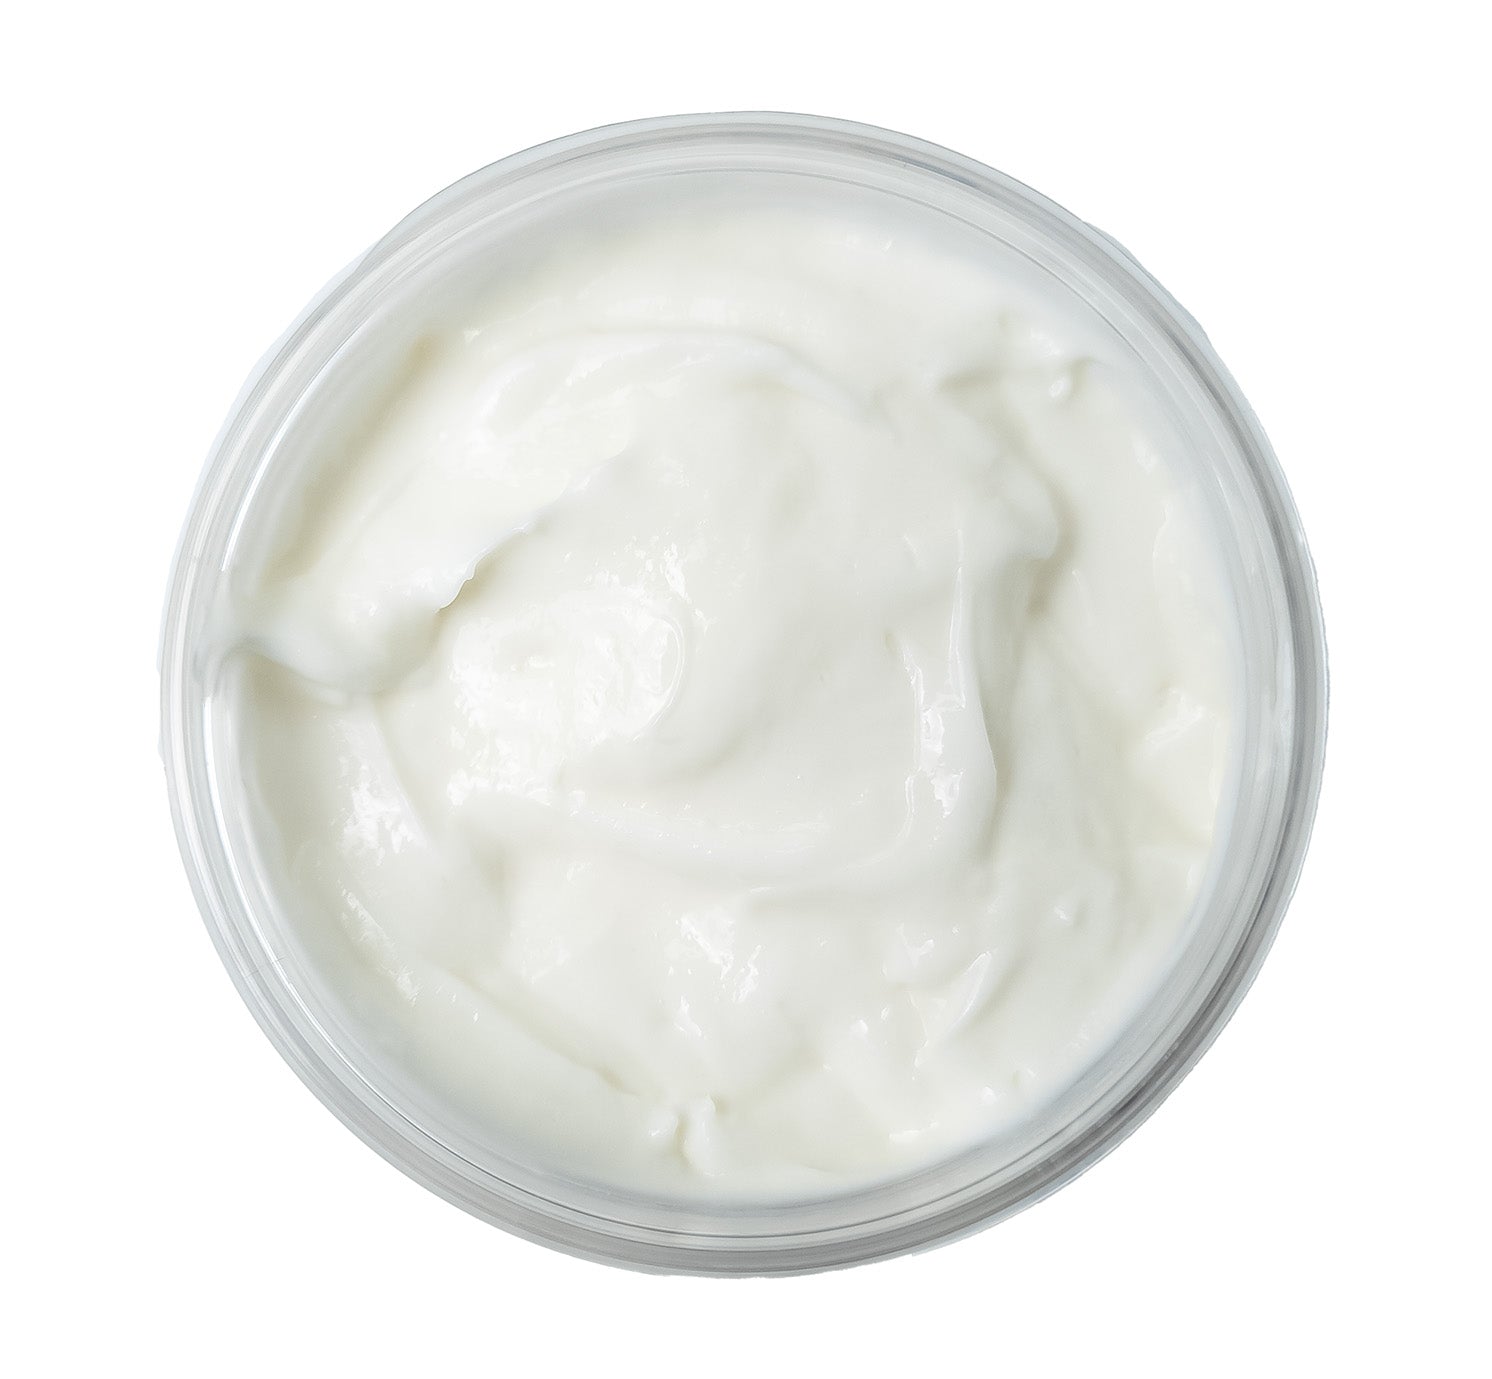 Goats Milk Body Butter Cream Perfect for Anytime of the Year.